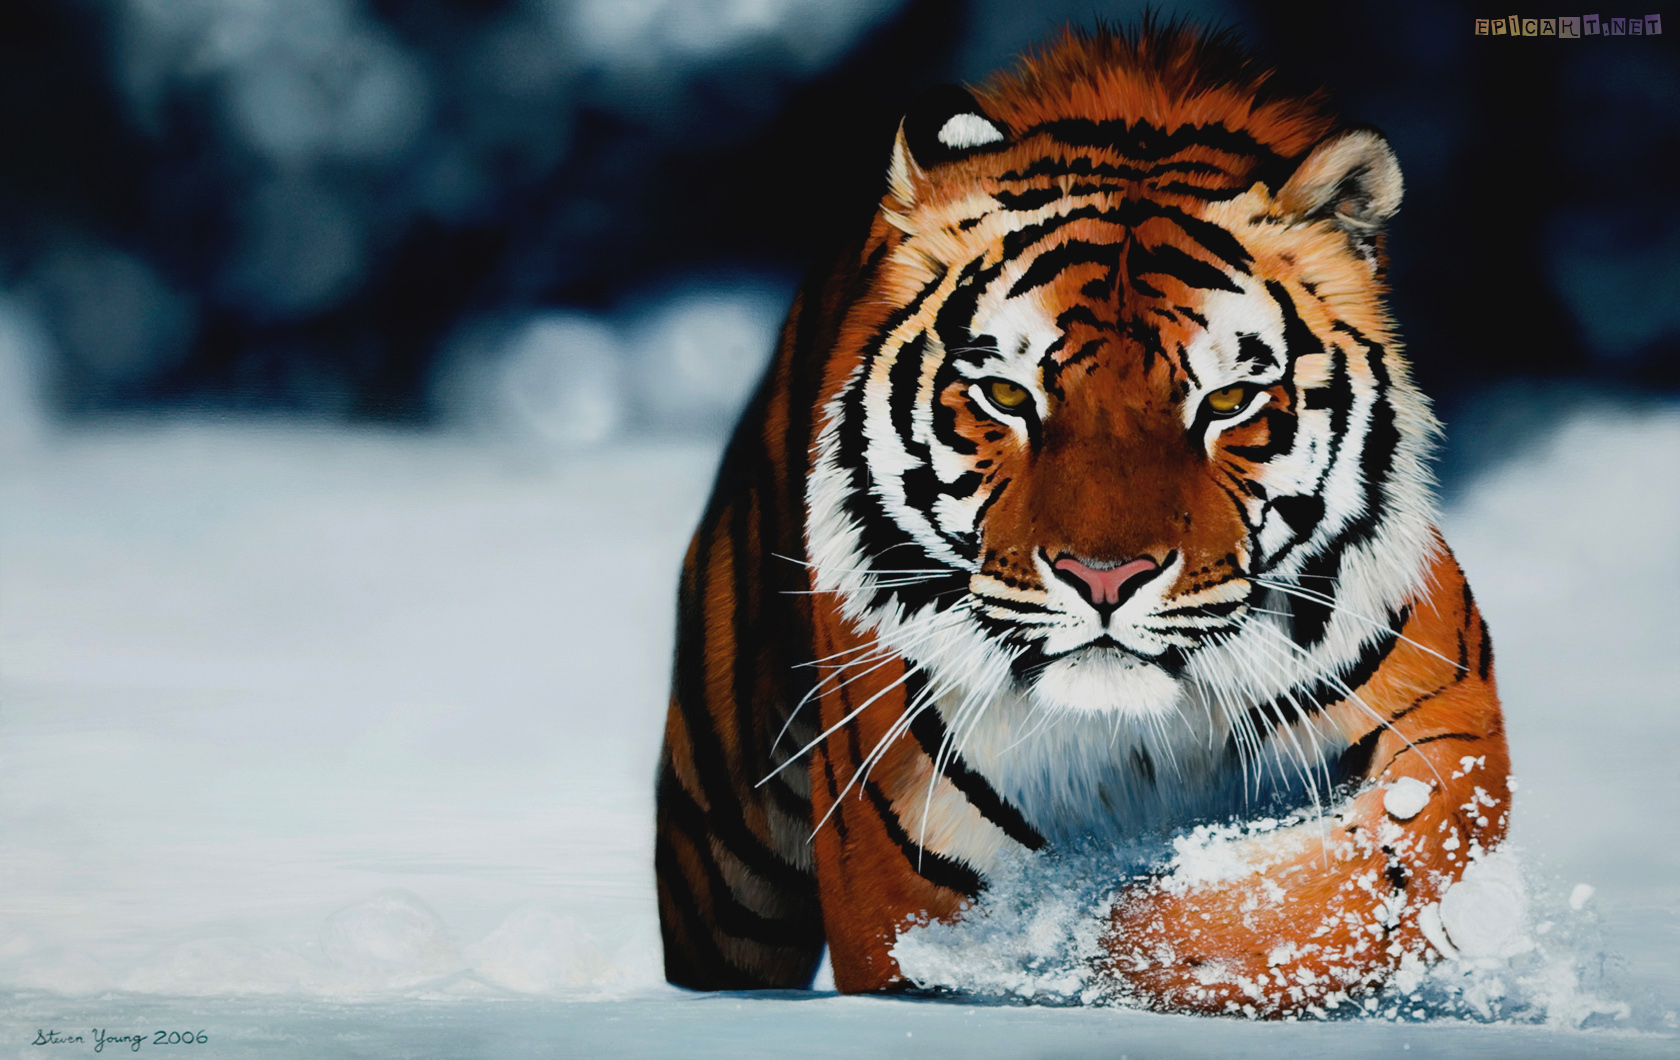 Awesome Tiger Picture New Desktop Hd Wallpapers Of Tigers Zoom